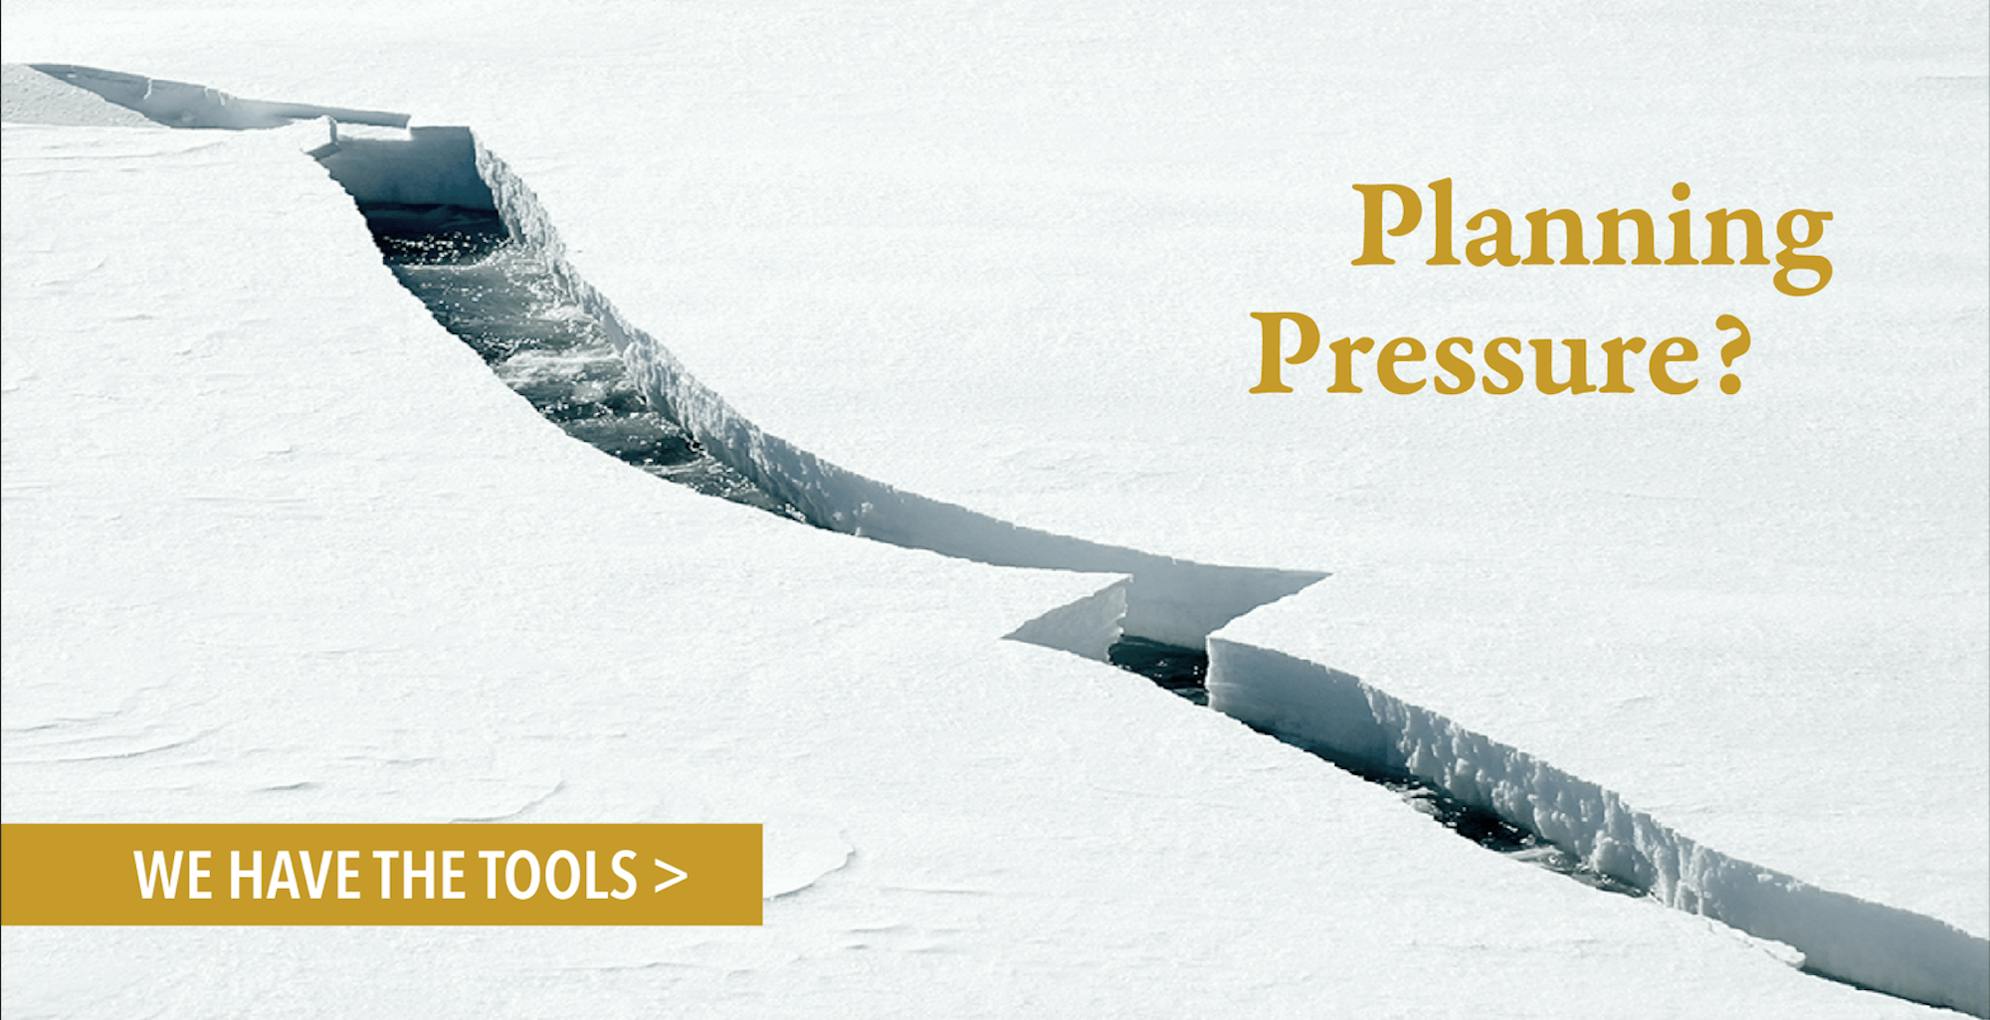 A sheet of ice rips in two on a frozen bed, with the text 'Planning Pressure? We have the tools' overlaid in gold.